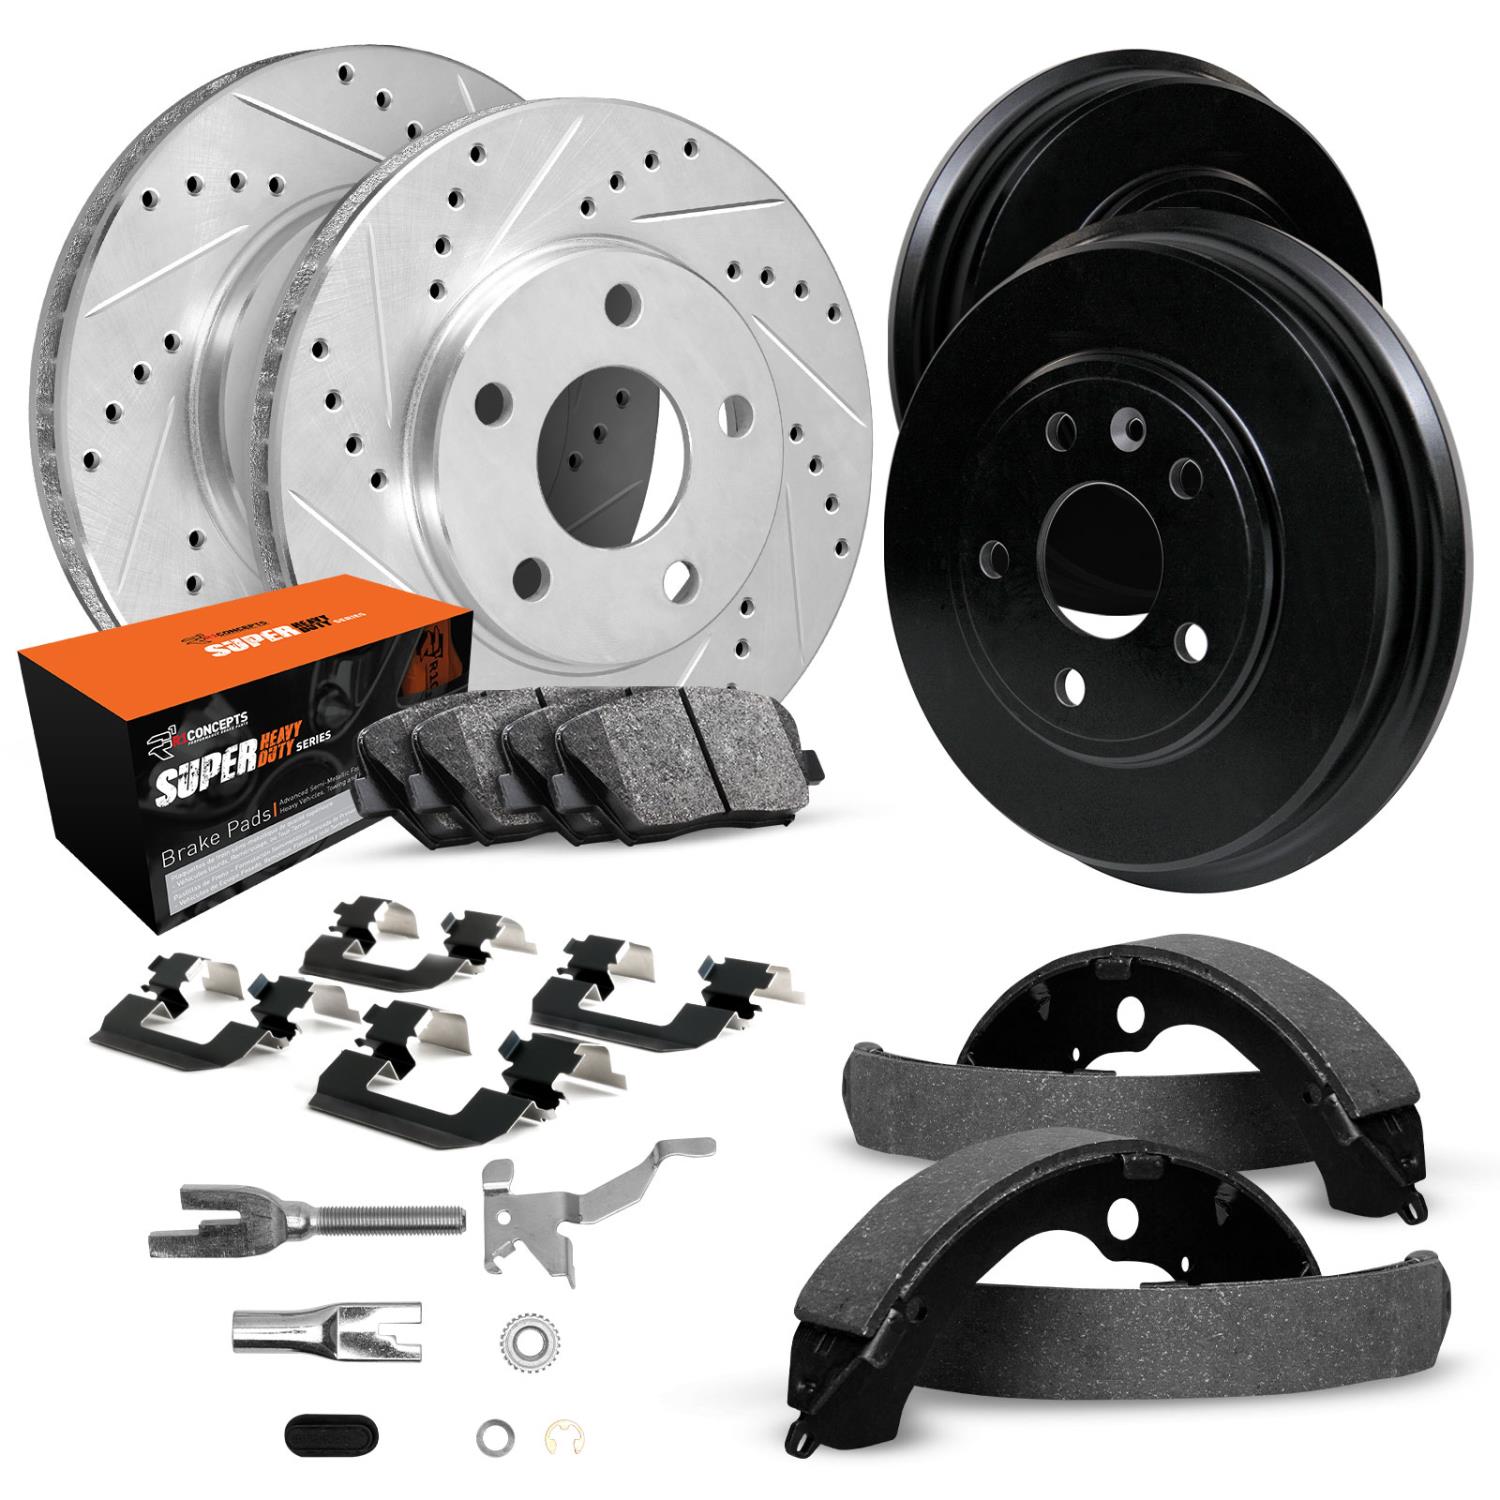 E-Line Drilled/Slotted Silver Rotor & Drum Set w/Super-Duty Pads, Shoes/Hardware/Adjusters, 1973-1973 Ford/Lincoln/Mercury/Mazda